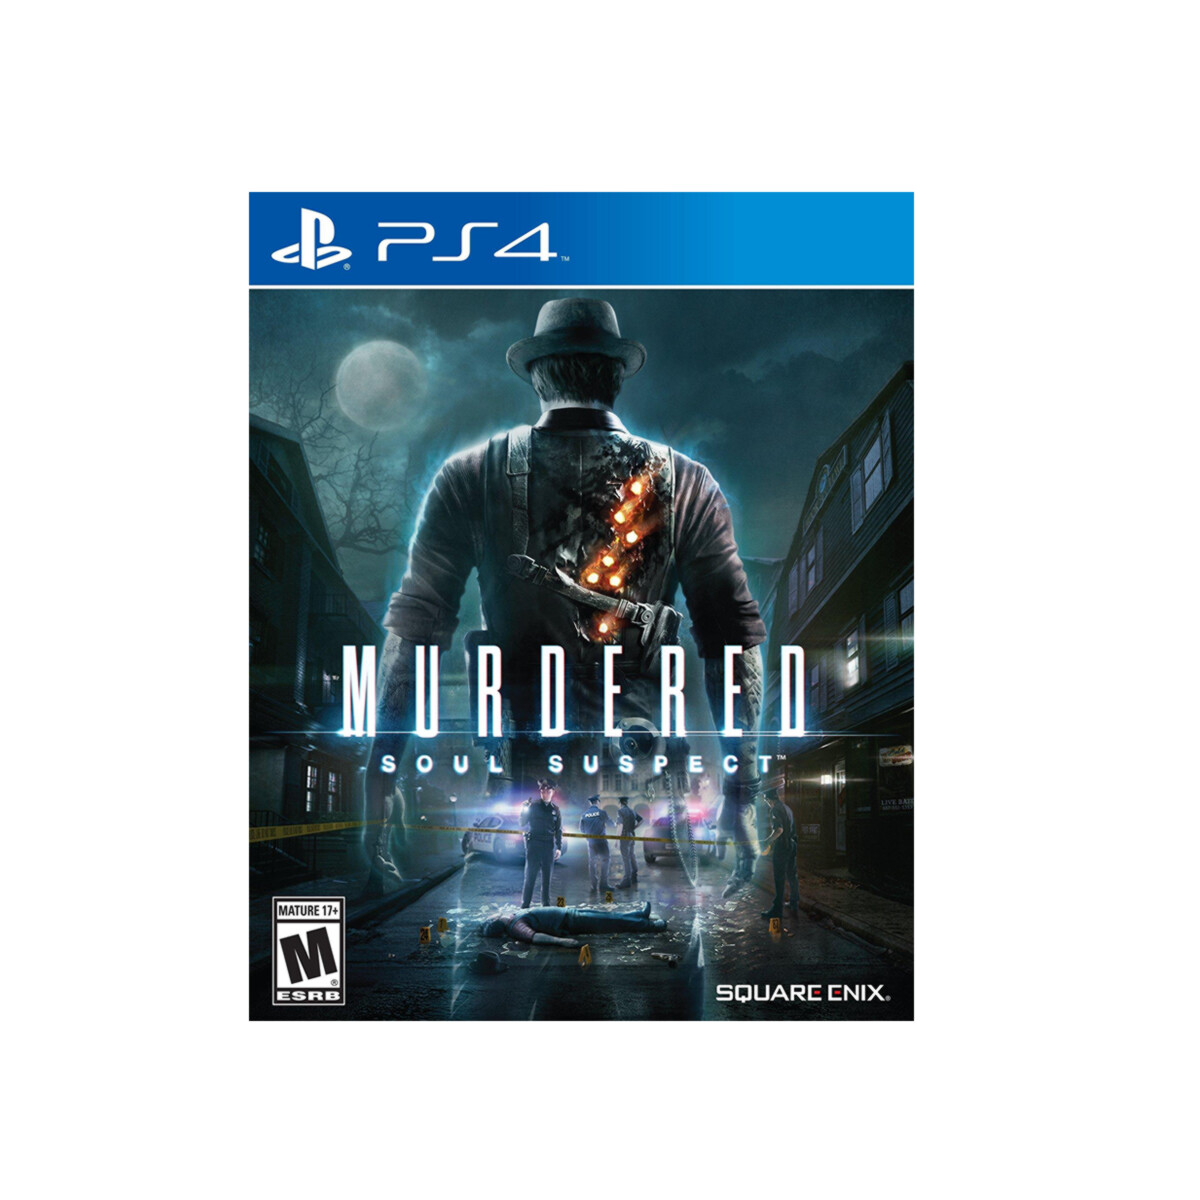 PS4 MURDERED: SOUL SUSPECT 